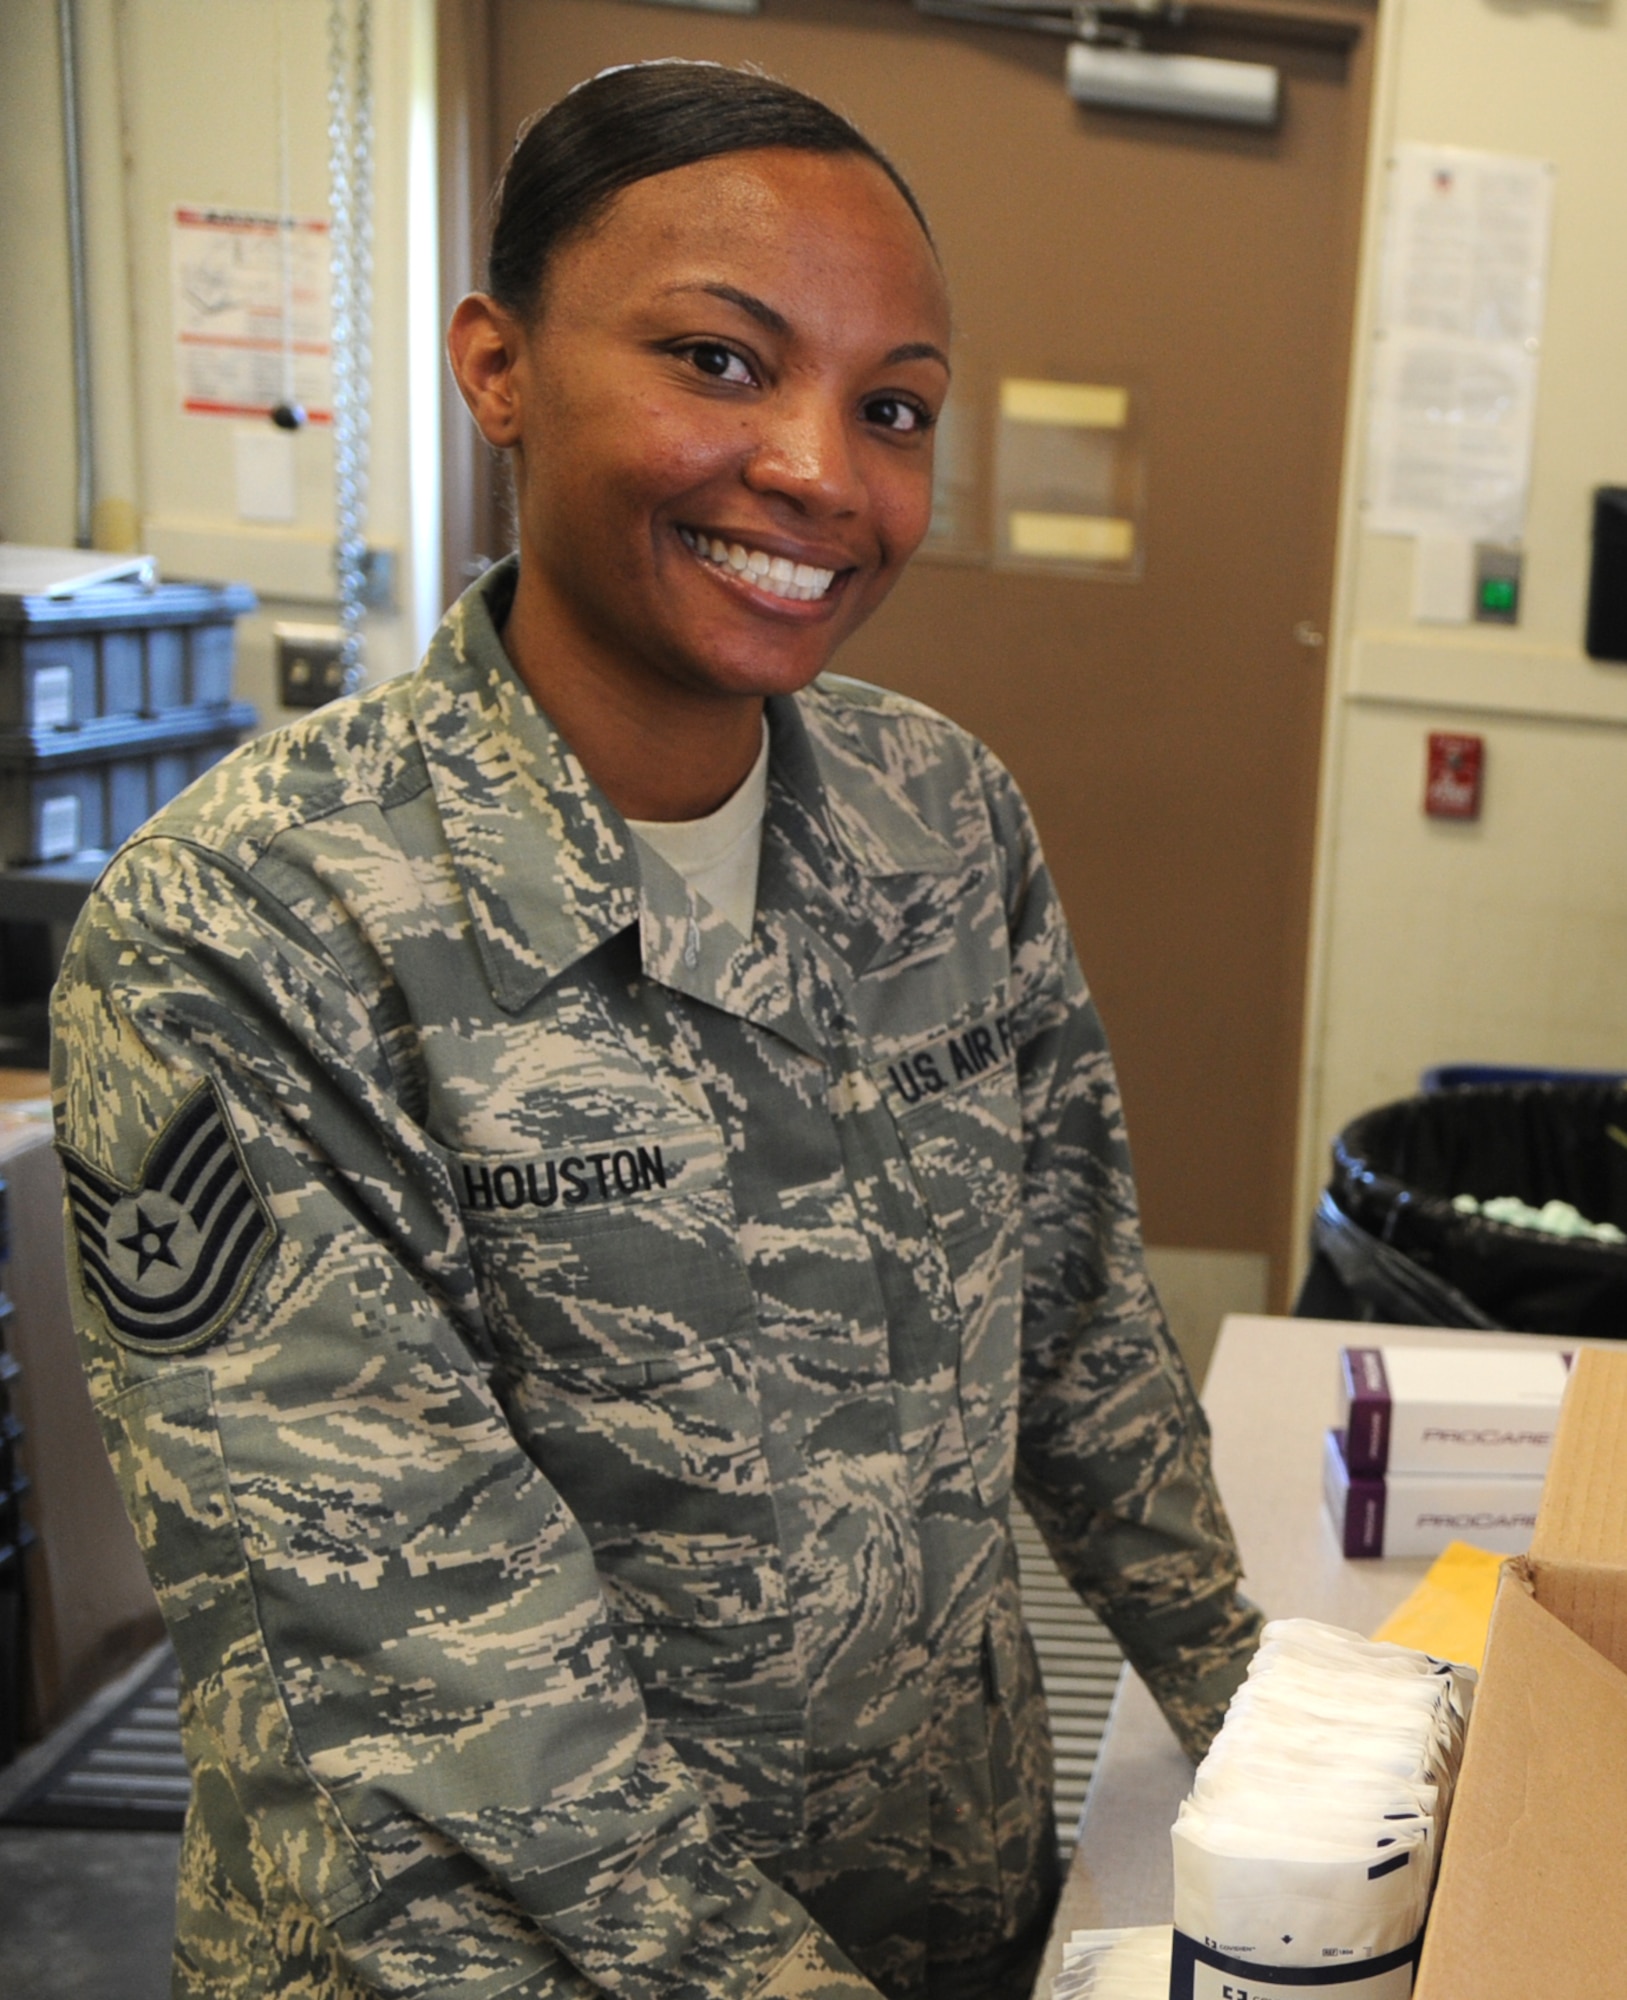 Newly STEP promoted Tech. Sgt. Shawna Houston, is a medical logistics technician with the 71st Medical Support Squadron at Vance Air Force Base, Okla. (U.S. Air Force photo/ Senior Airman Frank Casciotta)